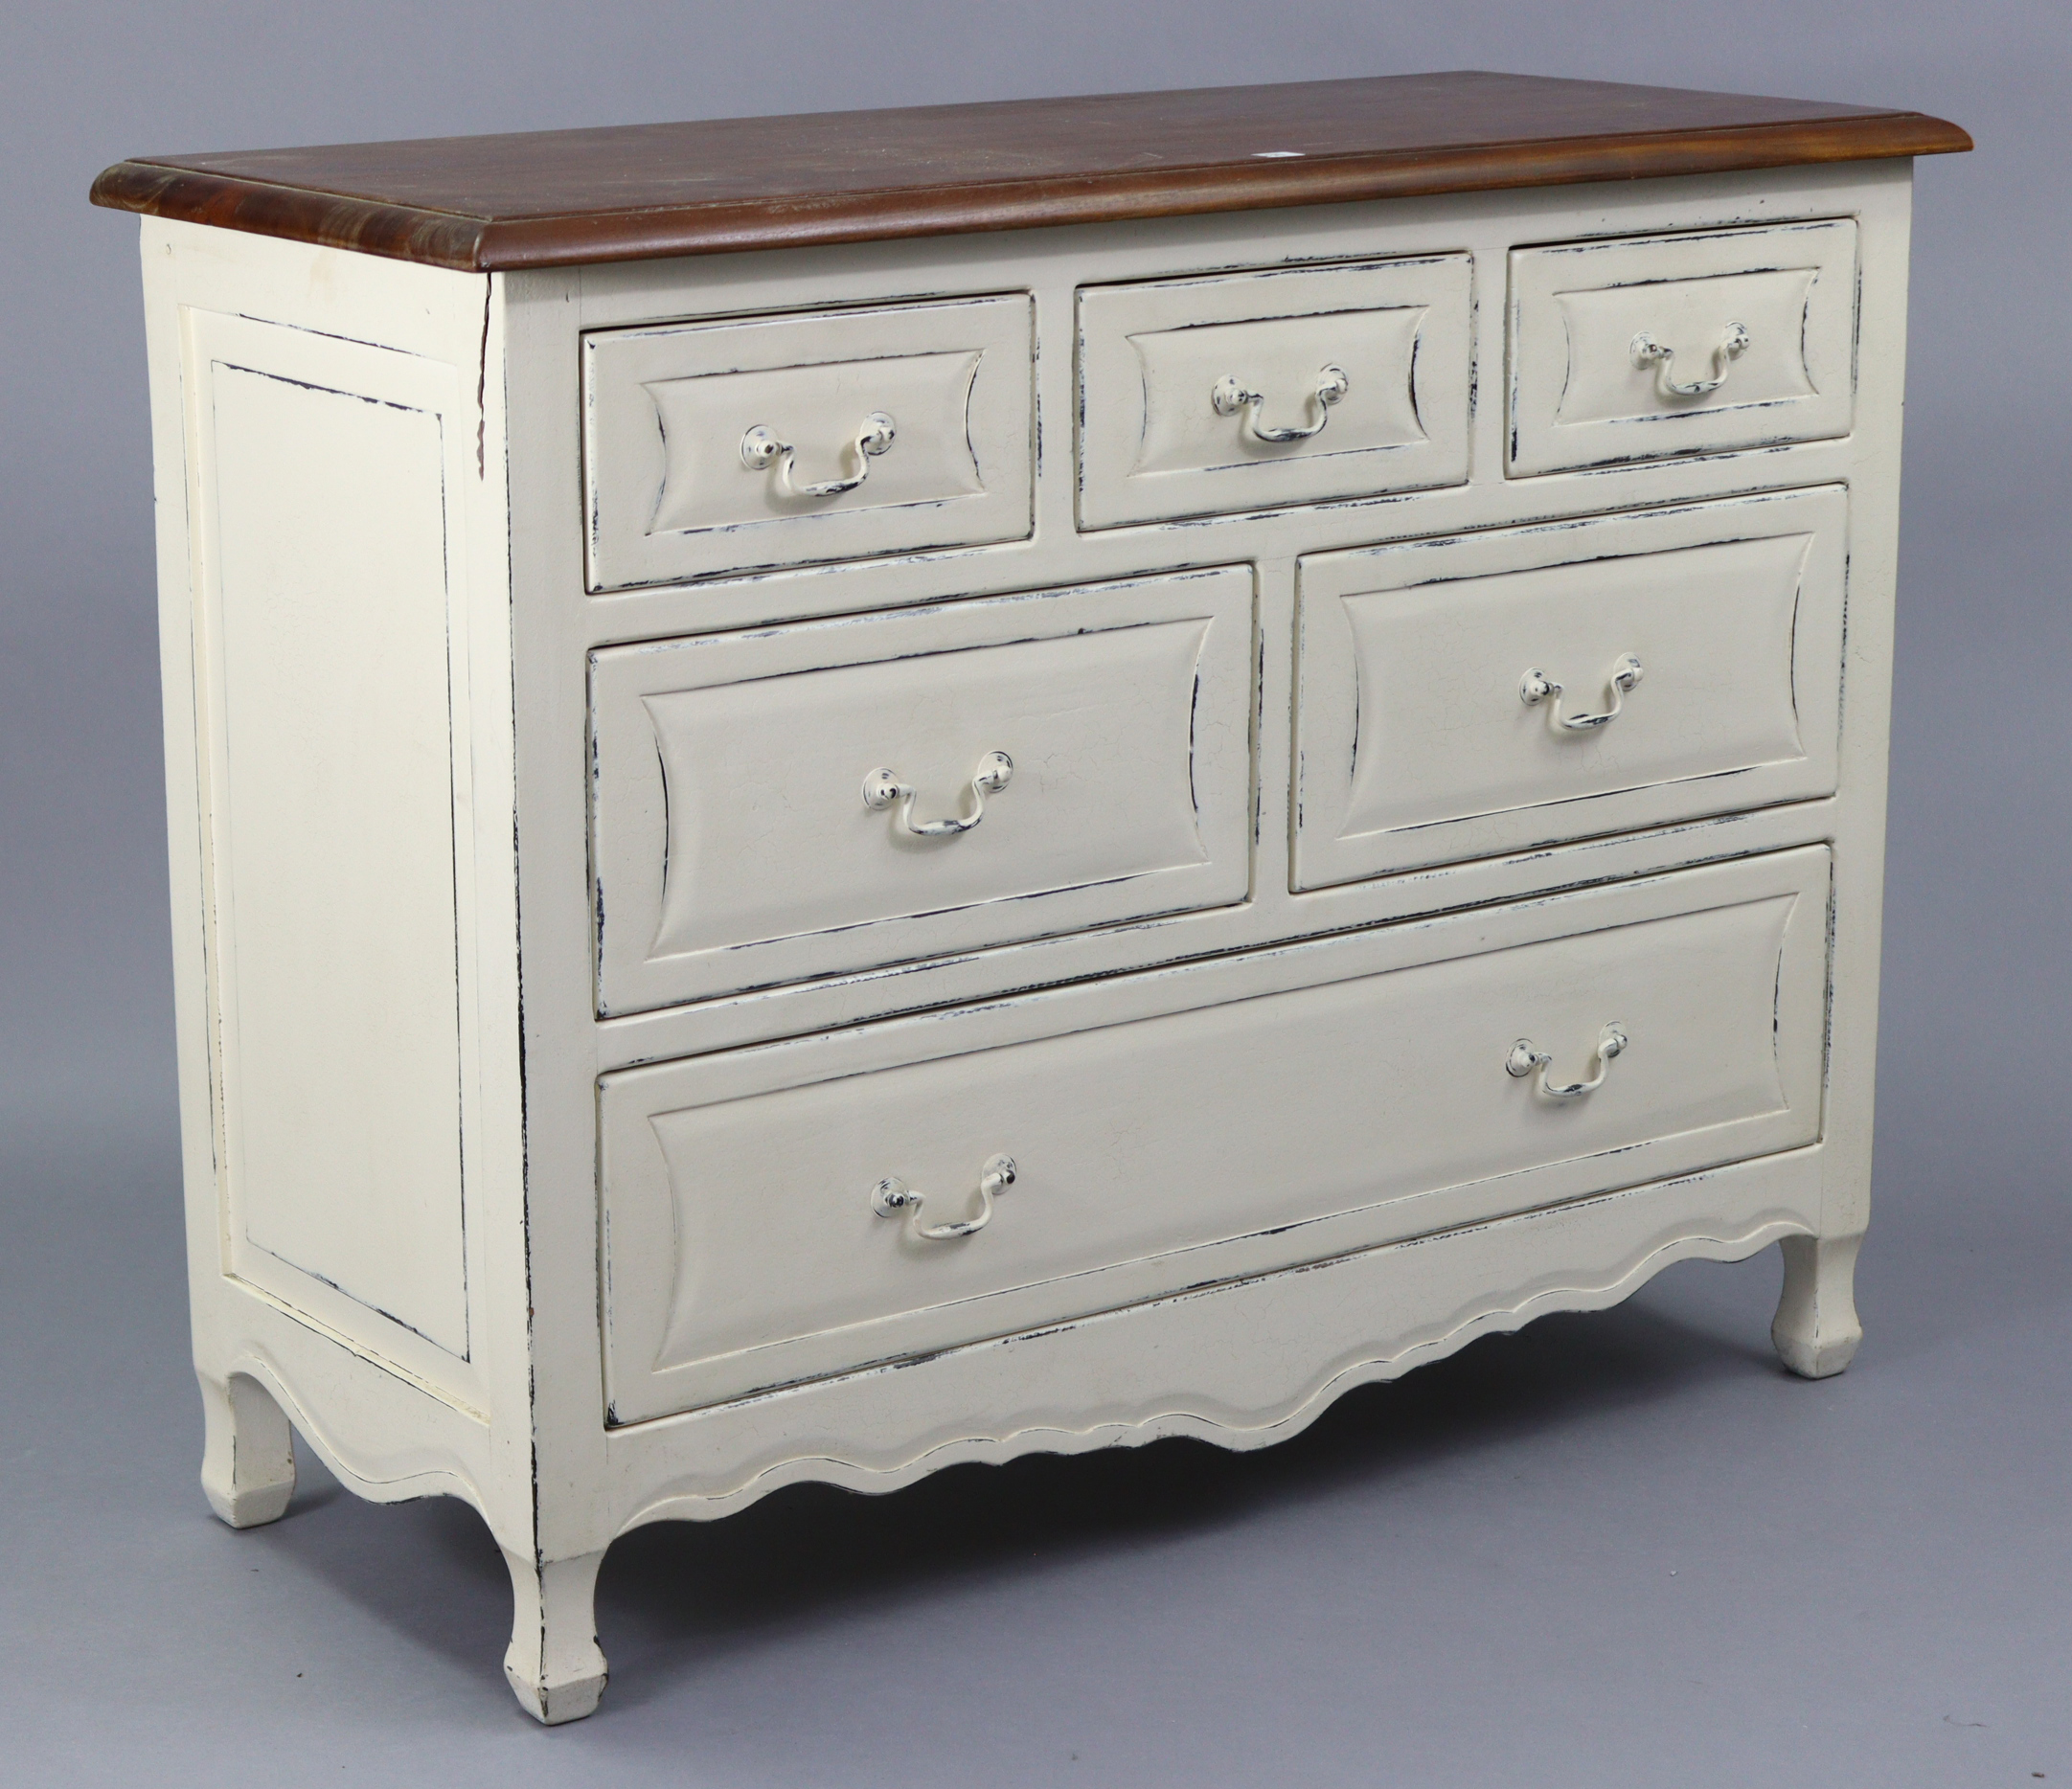 A modern continental-style cream painted wooden chest fitted with an arrangement of six drawers with